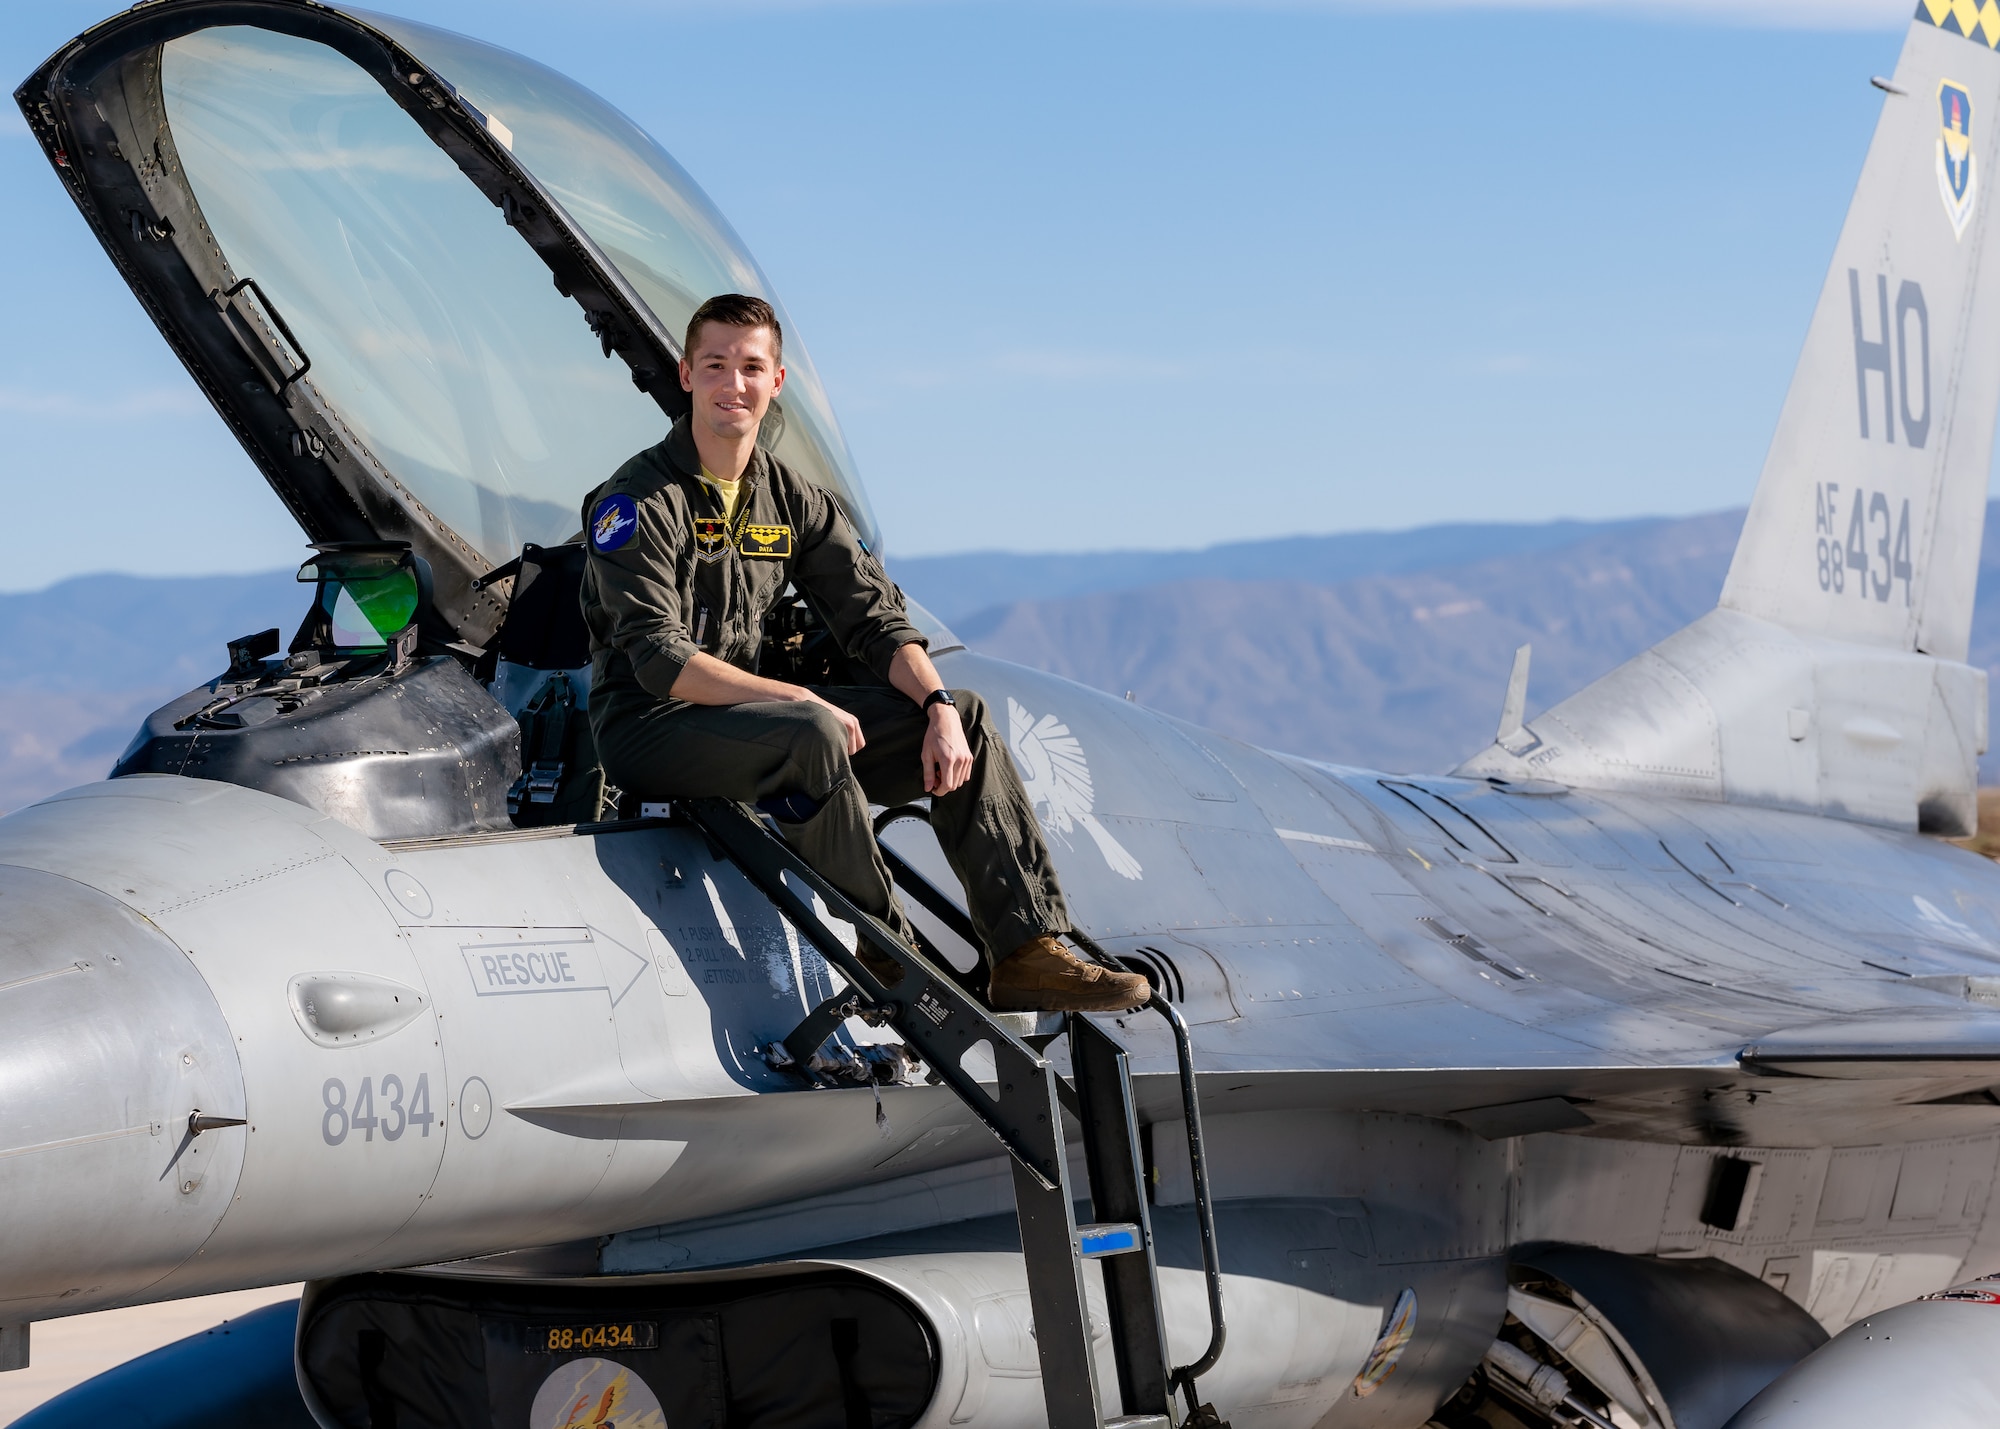 A plot in a green flight suit sits on top of a silver F-16 Viper aircraft in front of a blue sky.